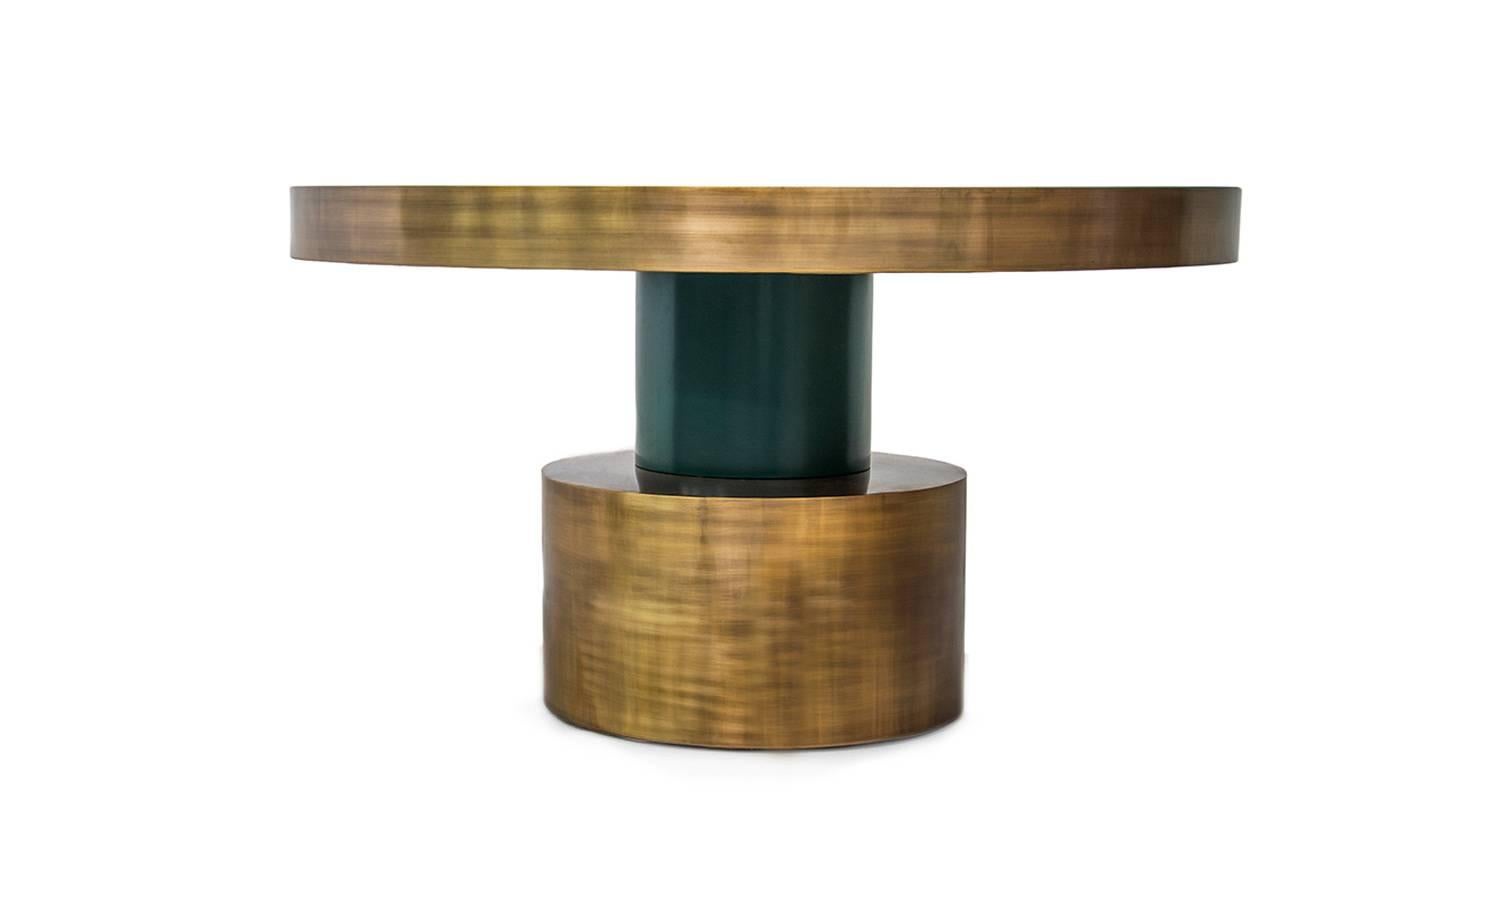 The Rio dining table is a truly unique piece of furniture that exudes tropical, sexy style. Crafted from the highest quality brass and your choice of lacquered wood, this dining table is built to last. The combination of the brass base and the